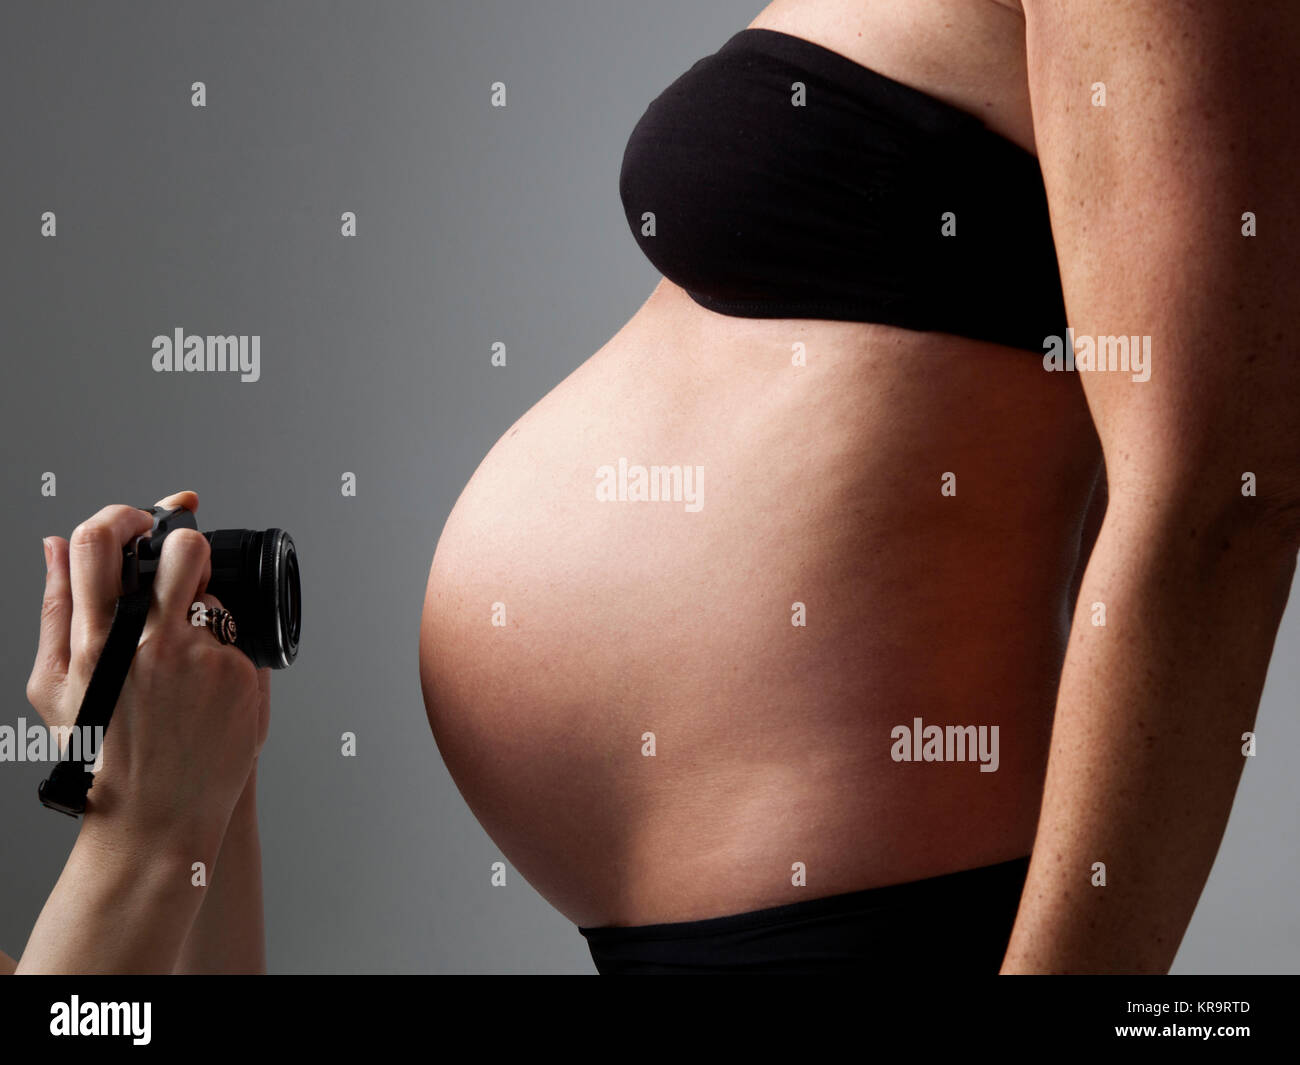 belly of a pregnant woman being photographed Stock Photo